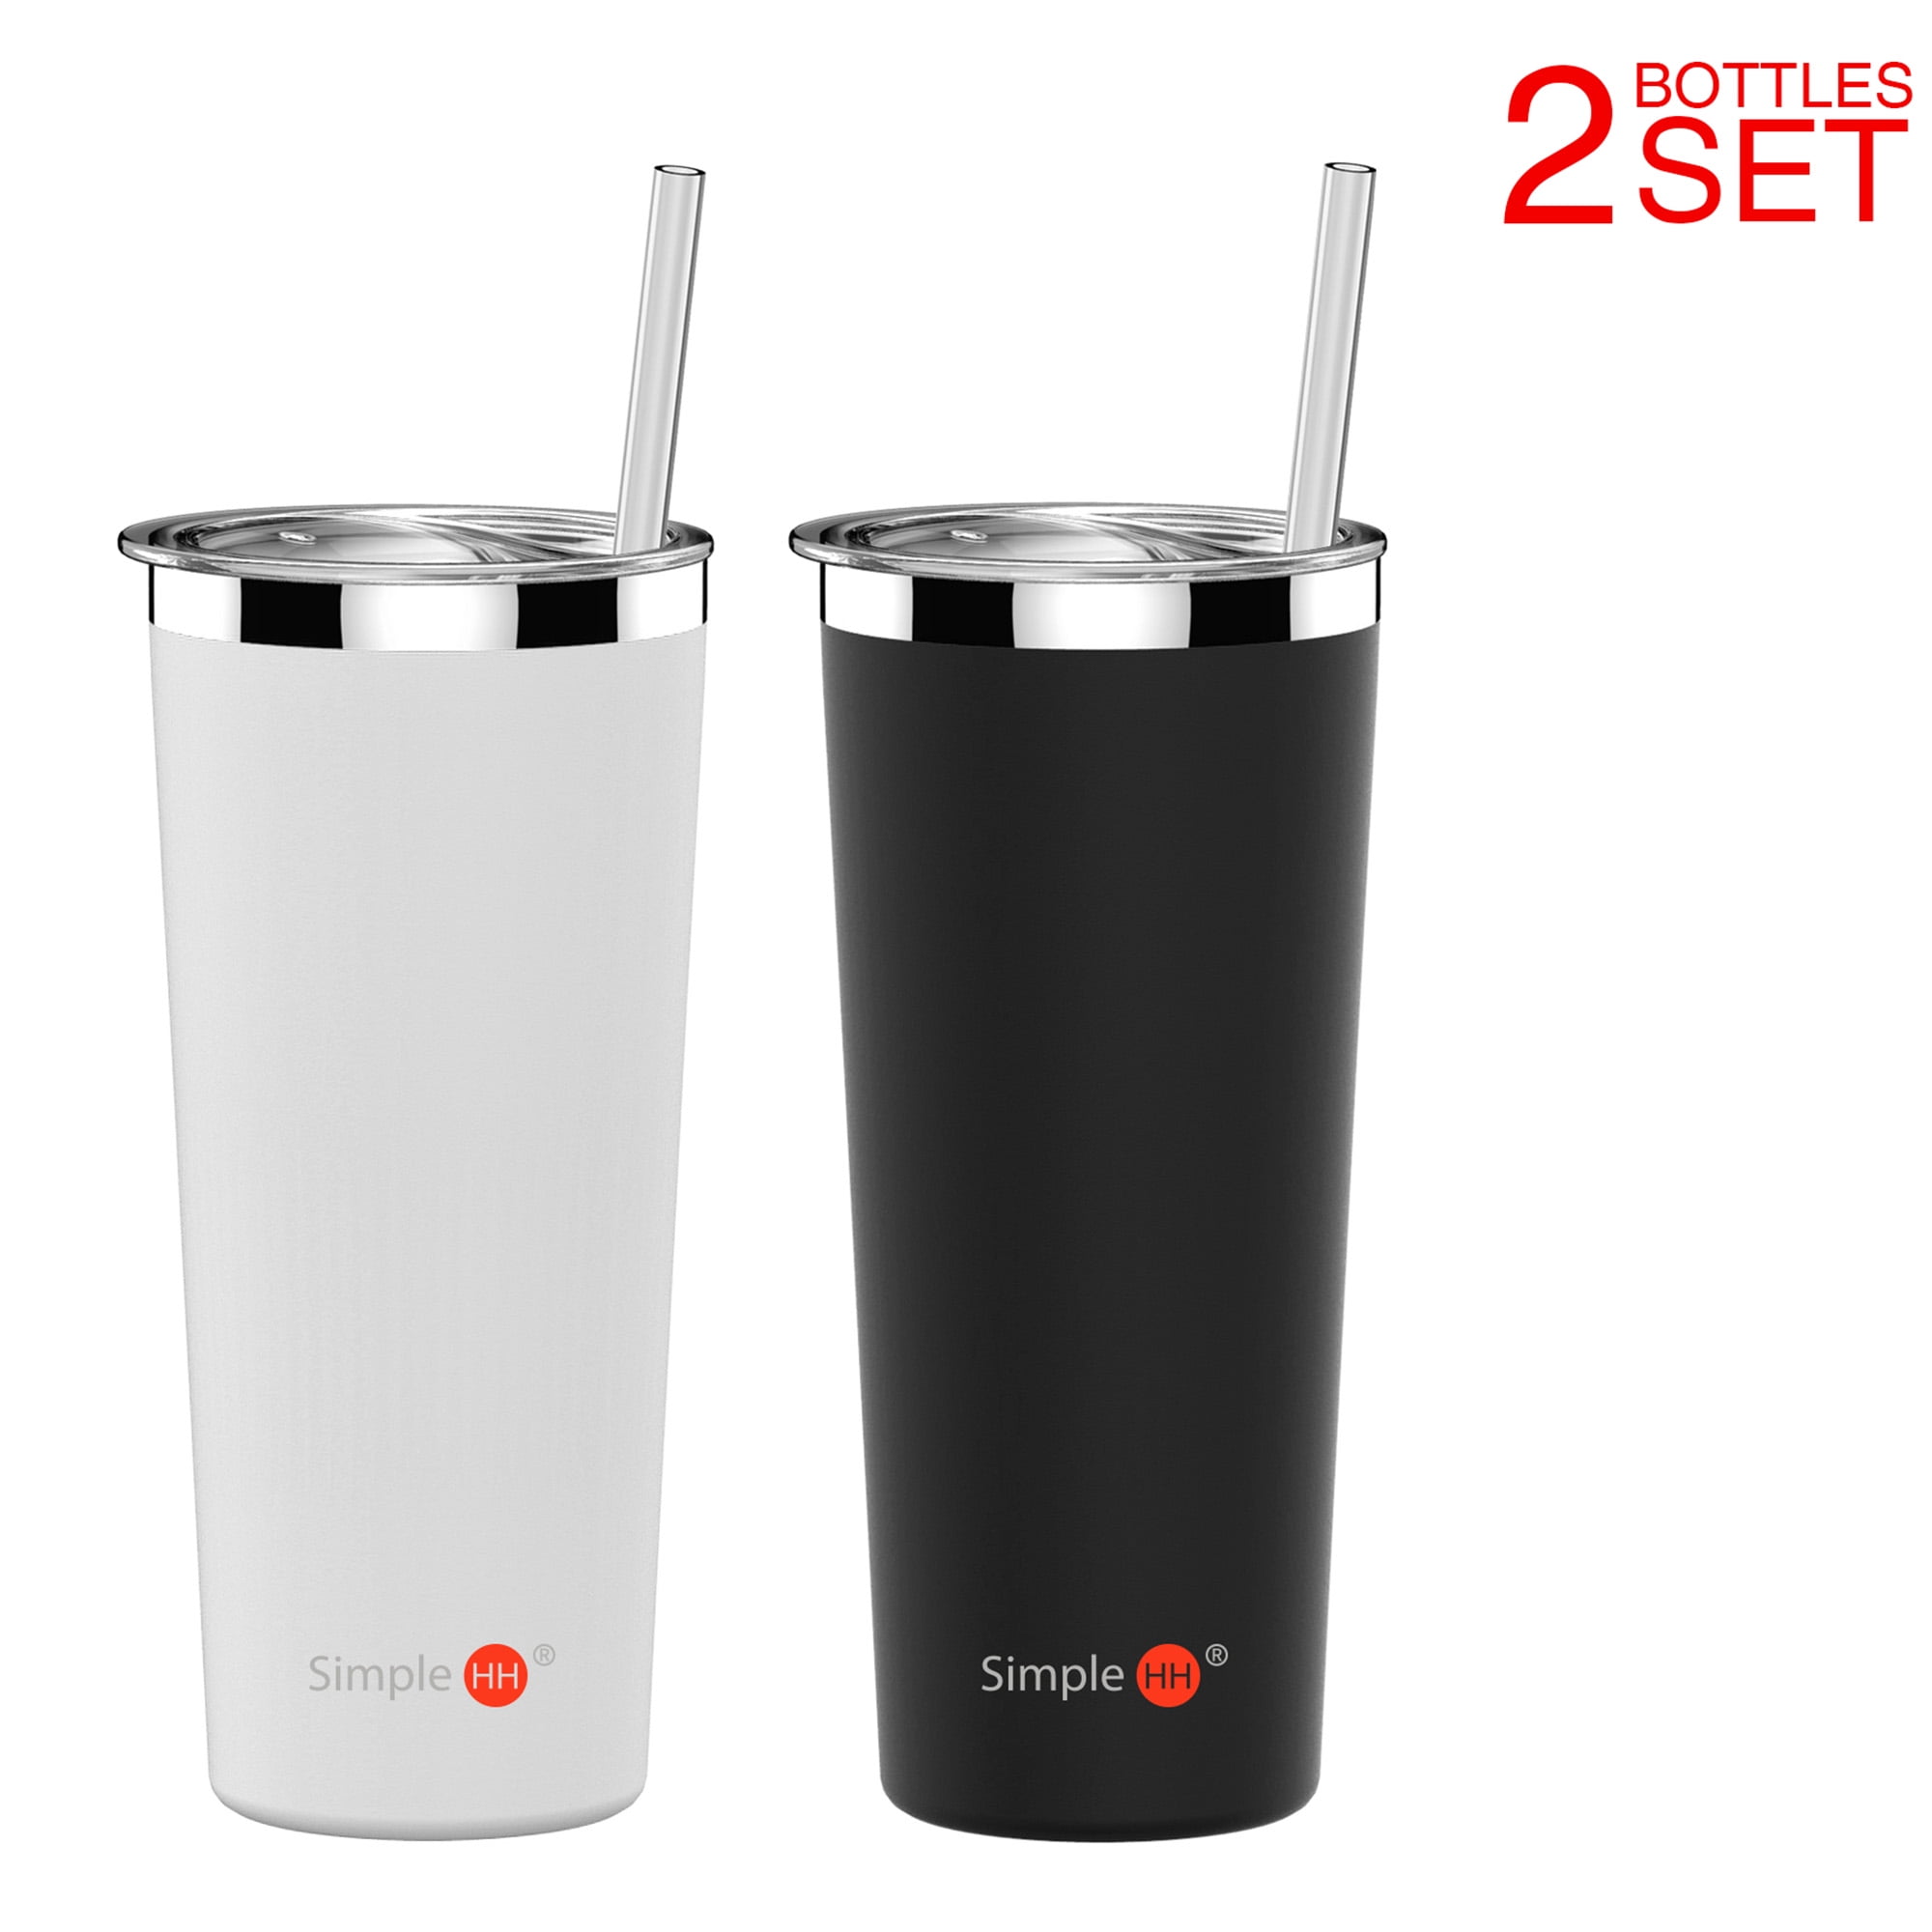 2 Pack Simple HH Vacuum Insulated Coffee Cup | Double Walled Stainless Steel Tumbler with straw | Travel Flask Mug | No Sweating, Keeps Hot & Cold| 22oz(650ml)|BPA Free